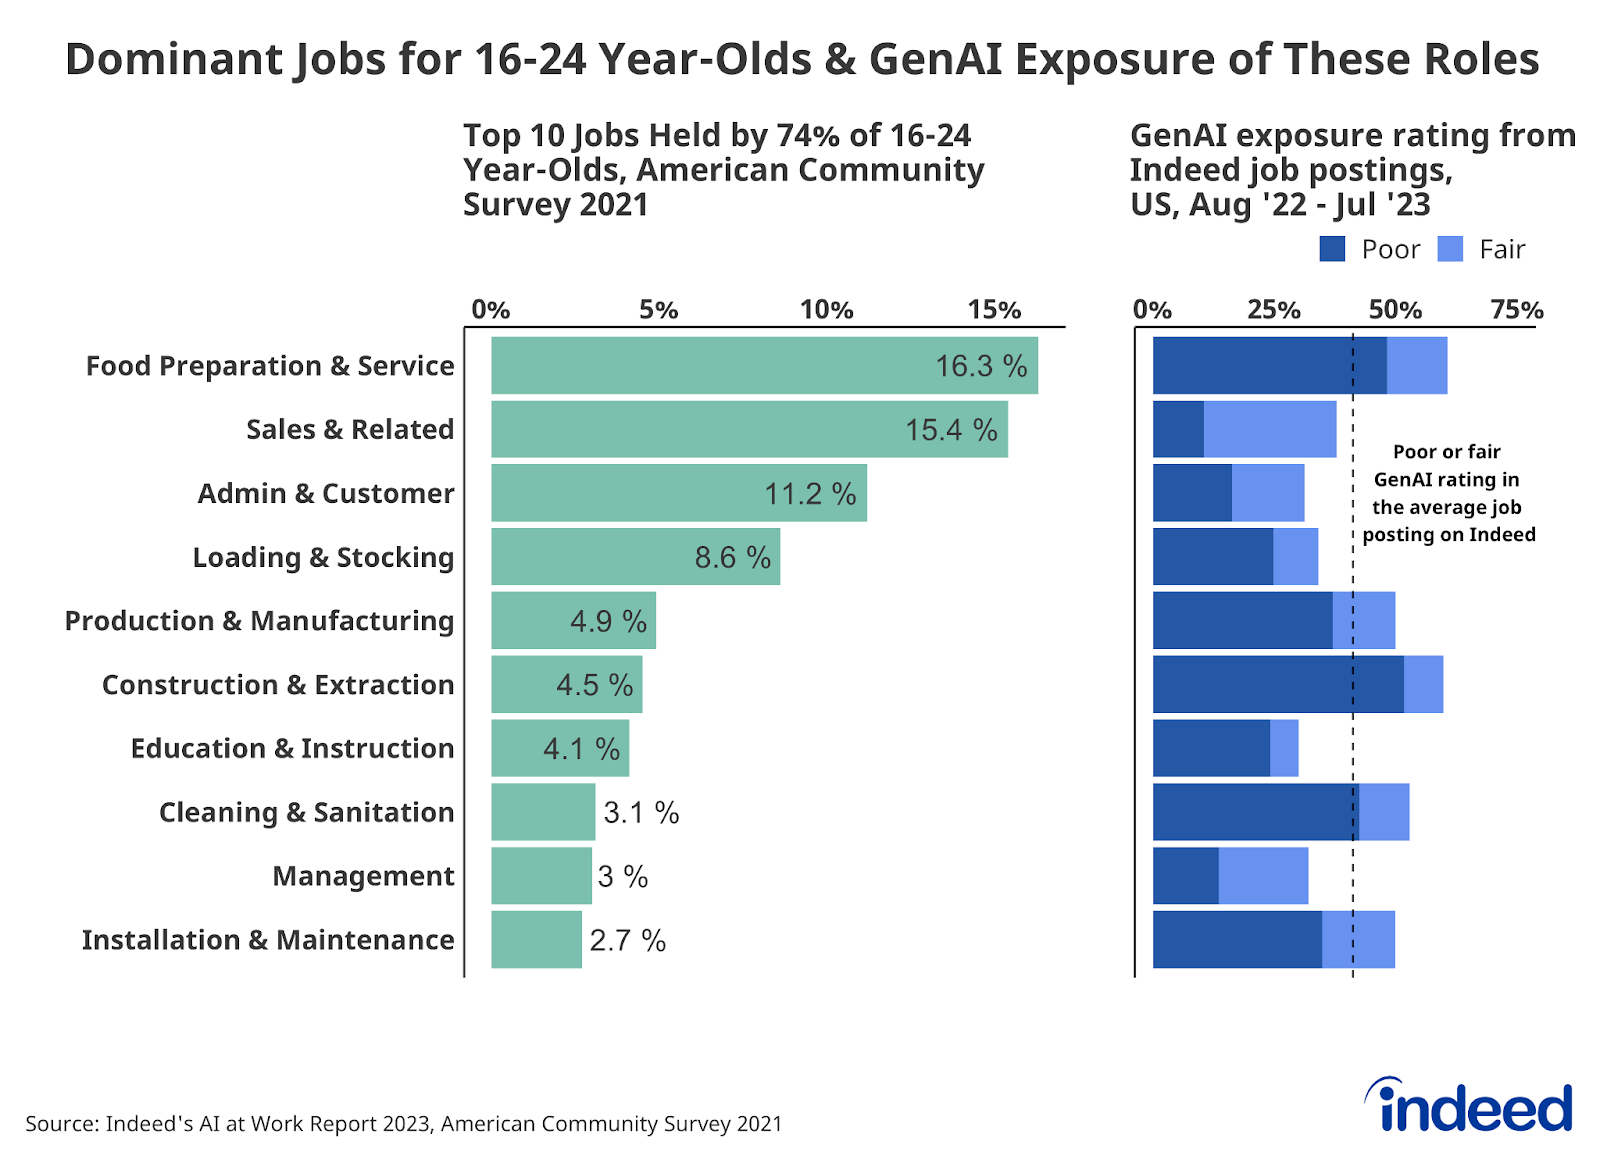 A series of two bar graphs titled "Dominant jobs for 16-24-year-olds & GenAI exposure of these roles," shows the top 10 jobs held by 74% of 16-24-year-olds and the corresponding GenAI exposure rating for those jobs. Food Preparation & Service was the most common type of job at 16.3%, while Installation & Maintenance was the rarest.  